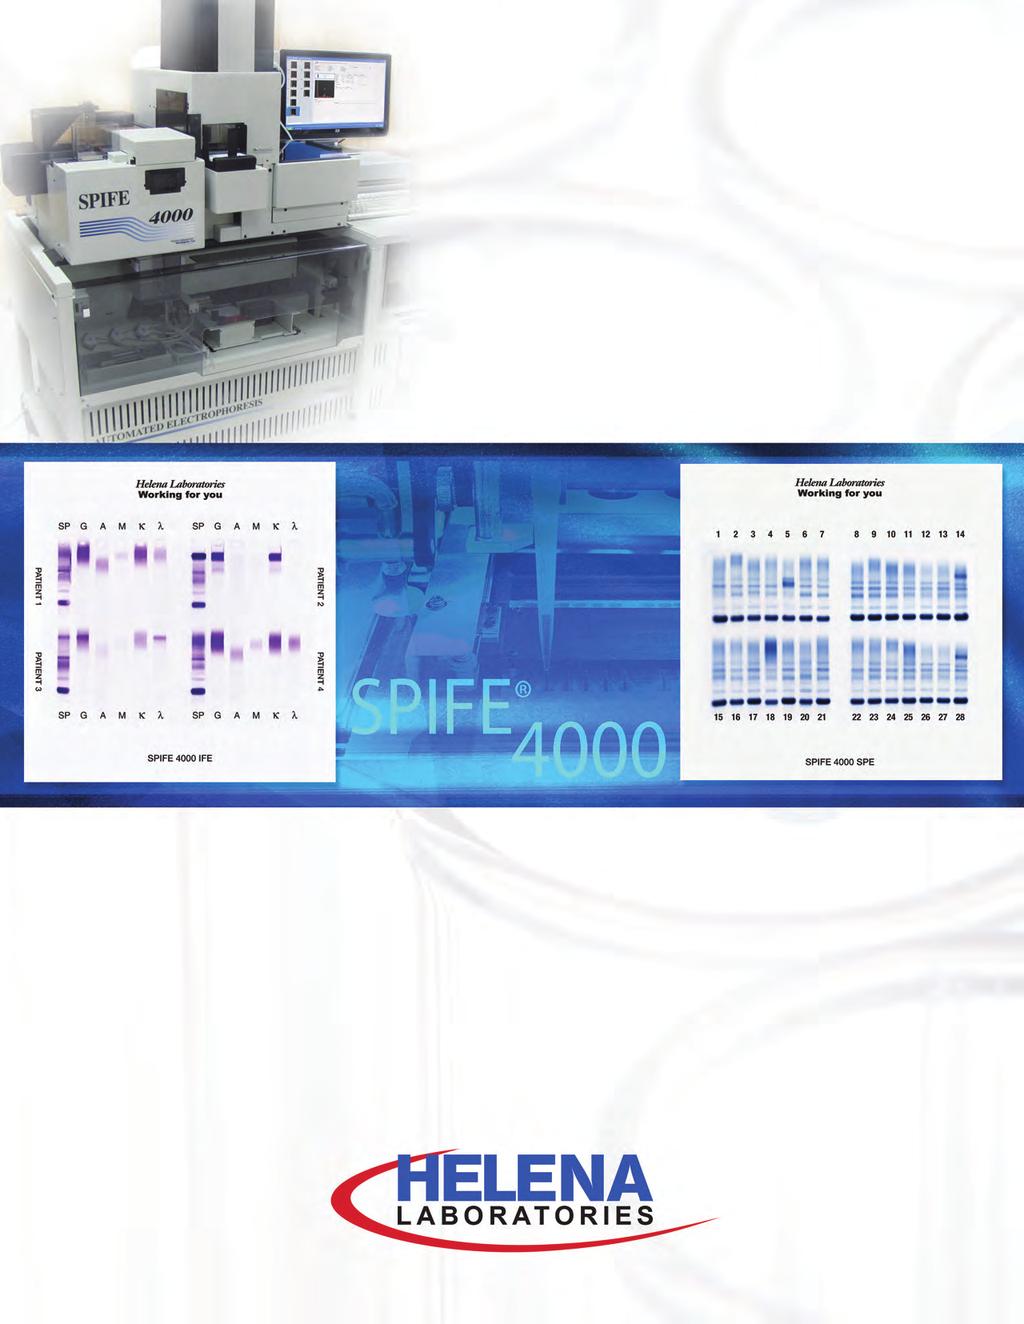 SPIFE 4000 All-in-One Fully Integrated System Need more automation for proteins and immunofixation? Look no further than SPIFE 4000 for batch-mode, walkaway automation.